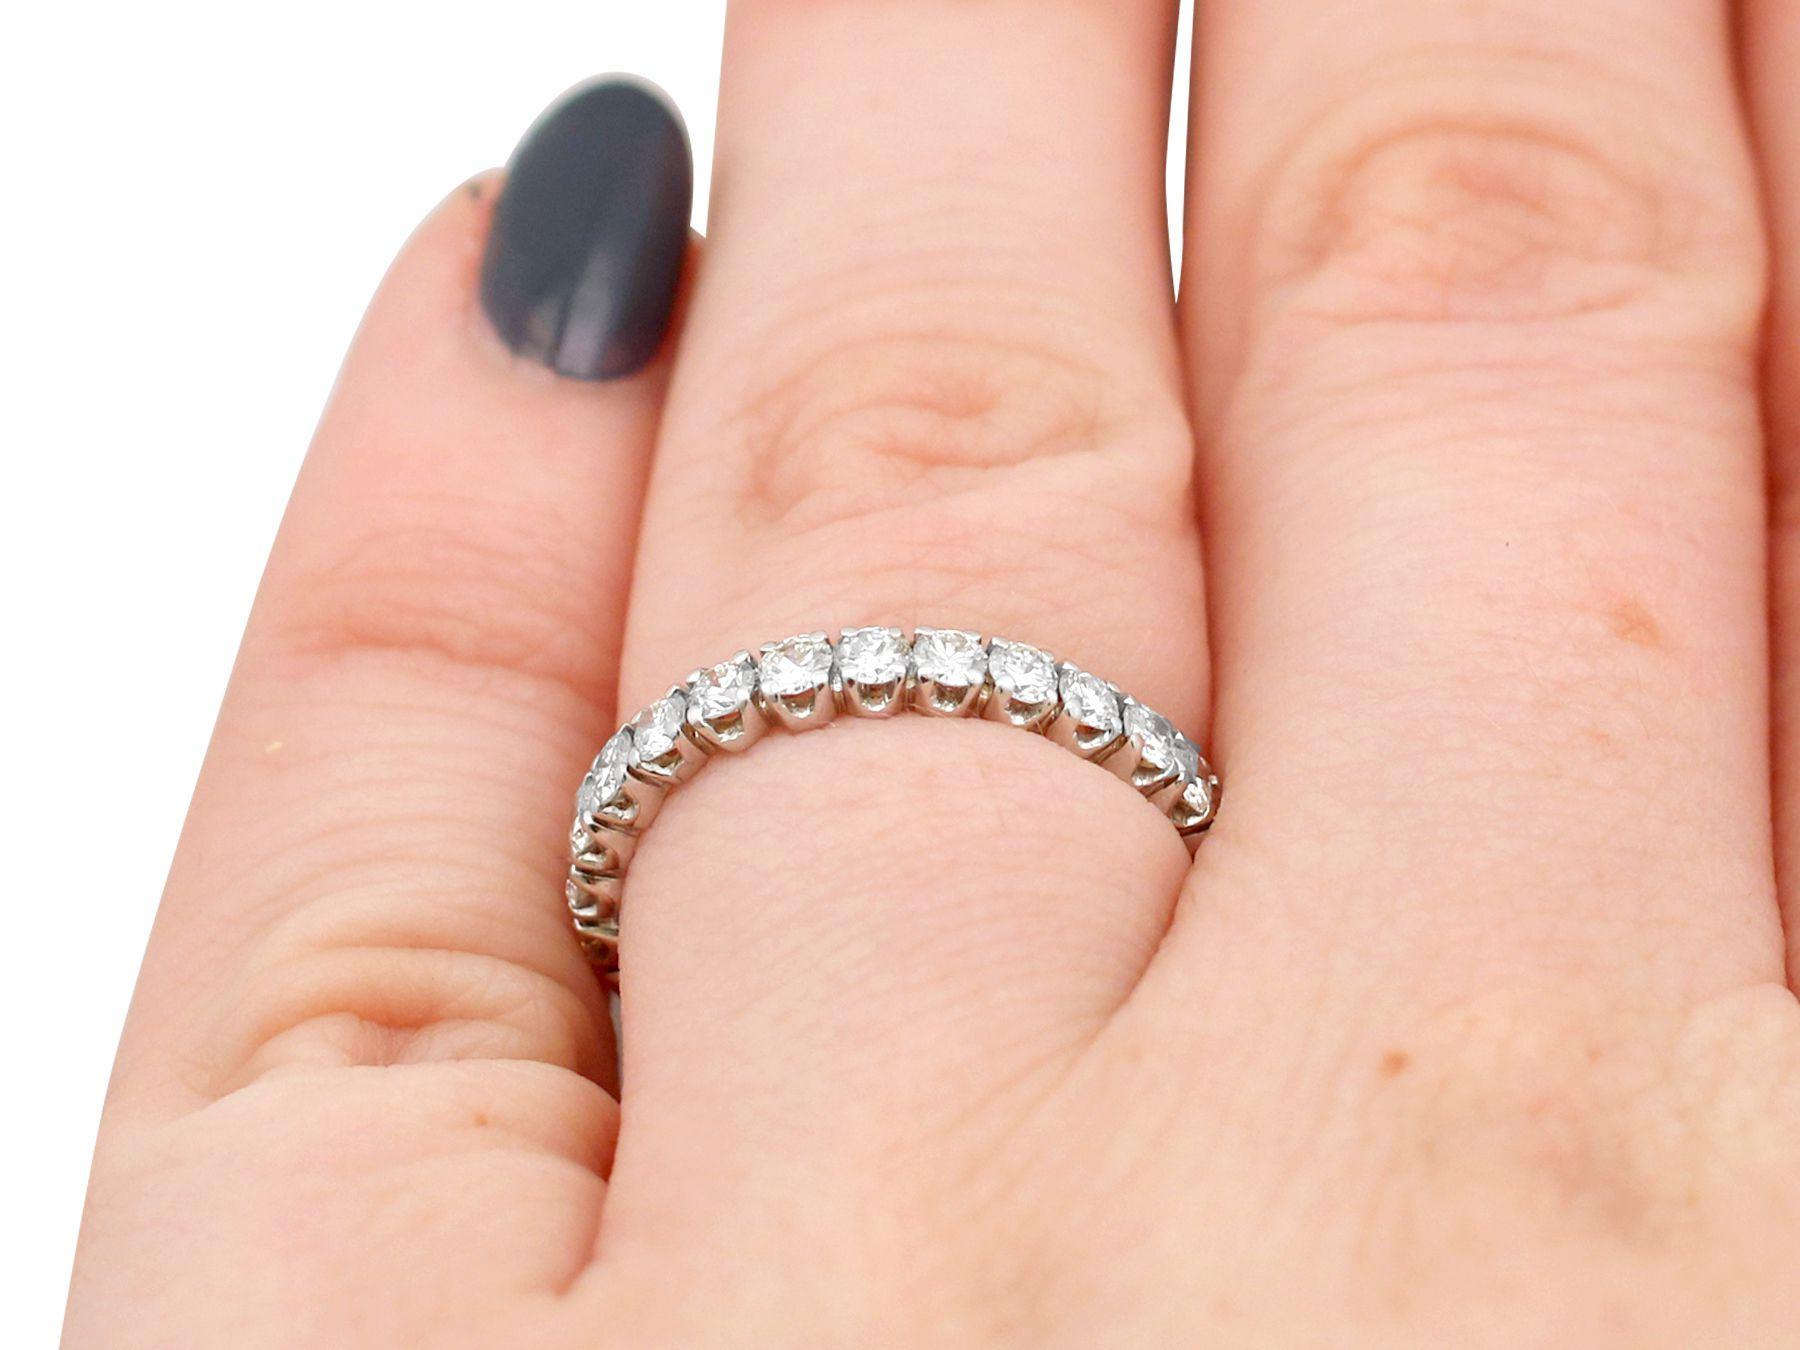 Vintage French 1.10 Carat Diamond and White Gold Full Eternity Ring circa 1970 For Sale 1